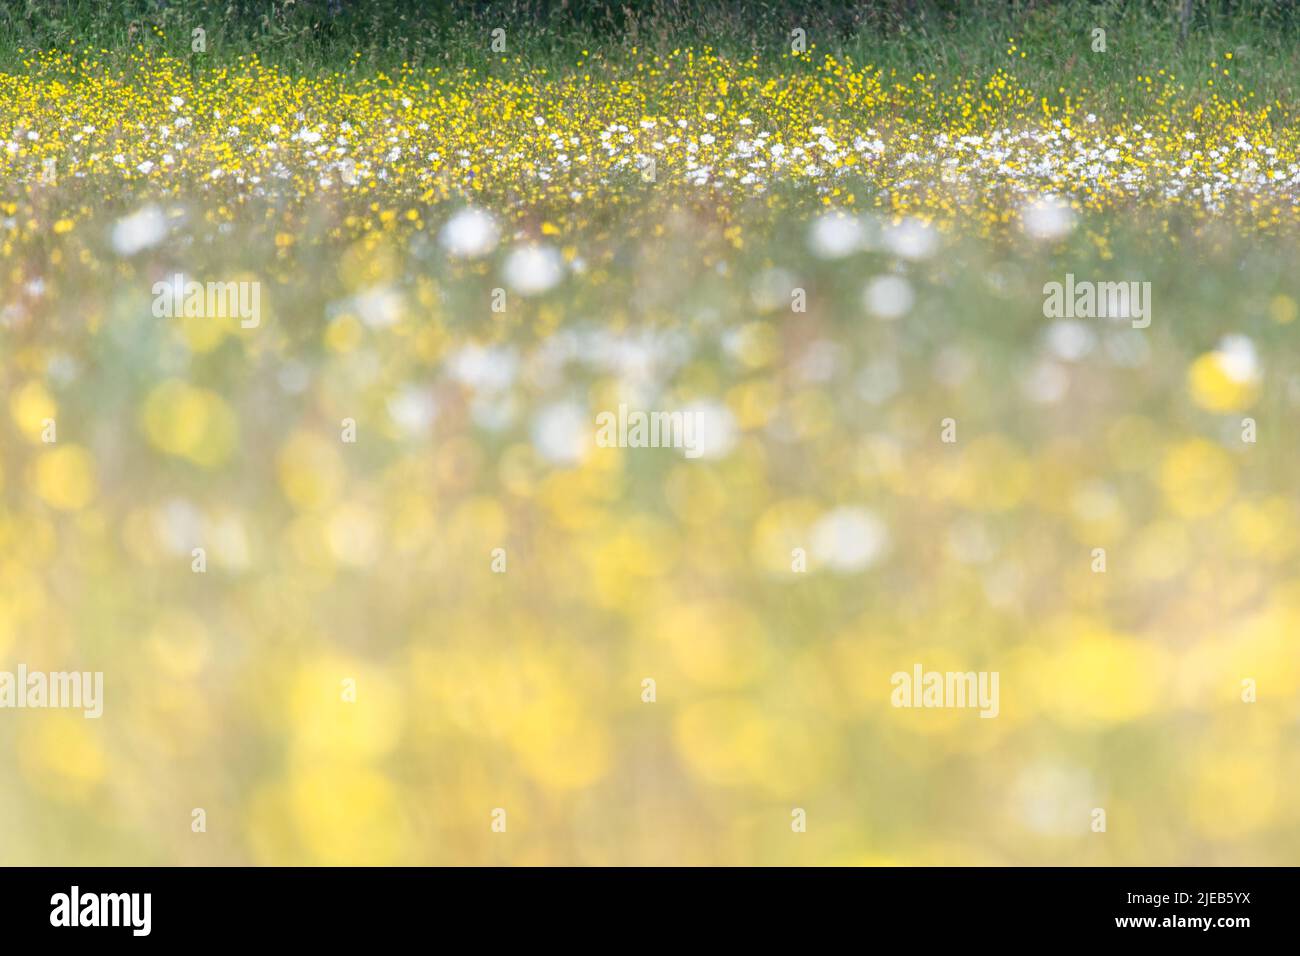 Wildflower field abstract with foreground out of focus - buttercups and ox-eye daisies Stock Photo